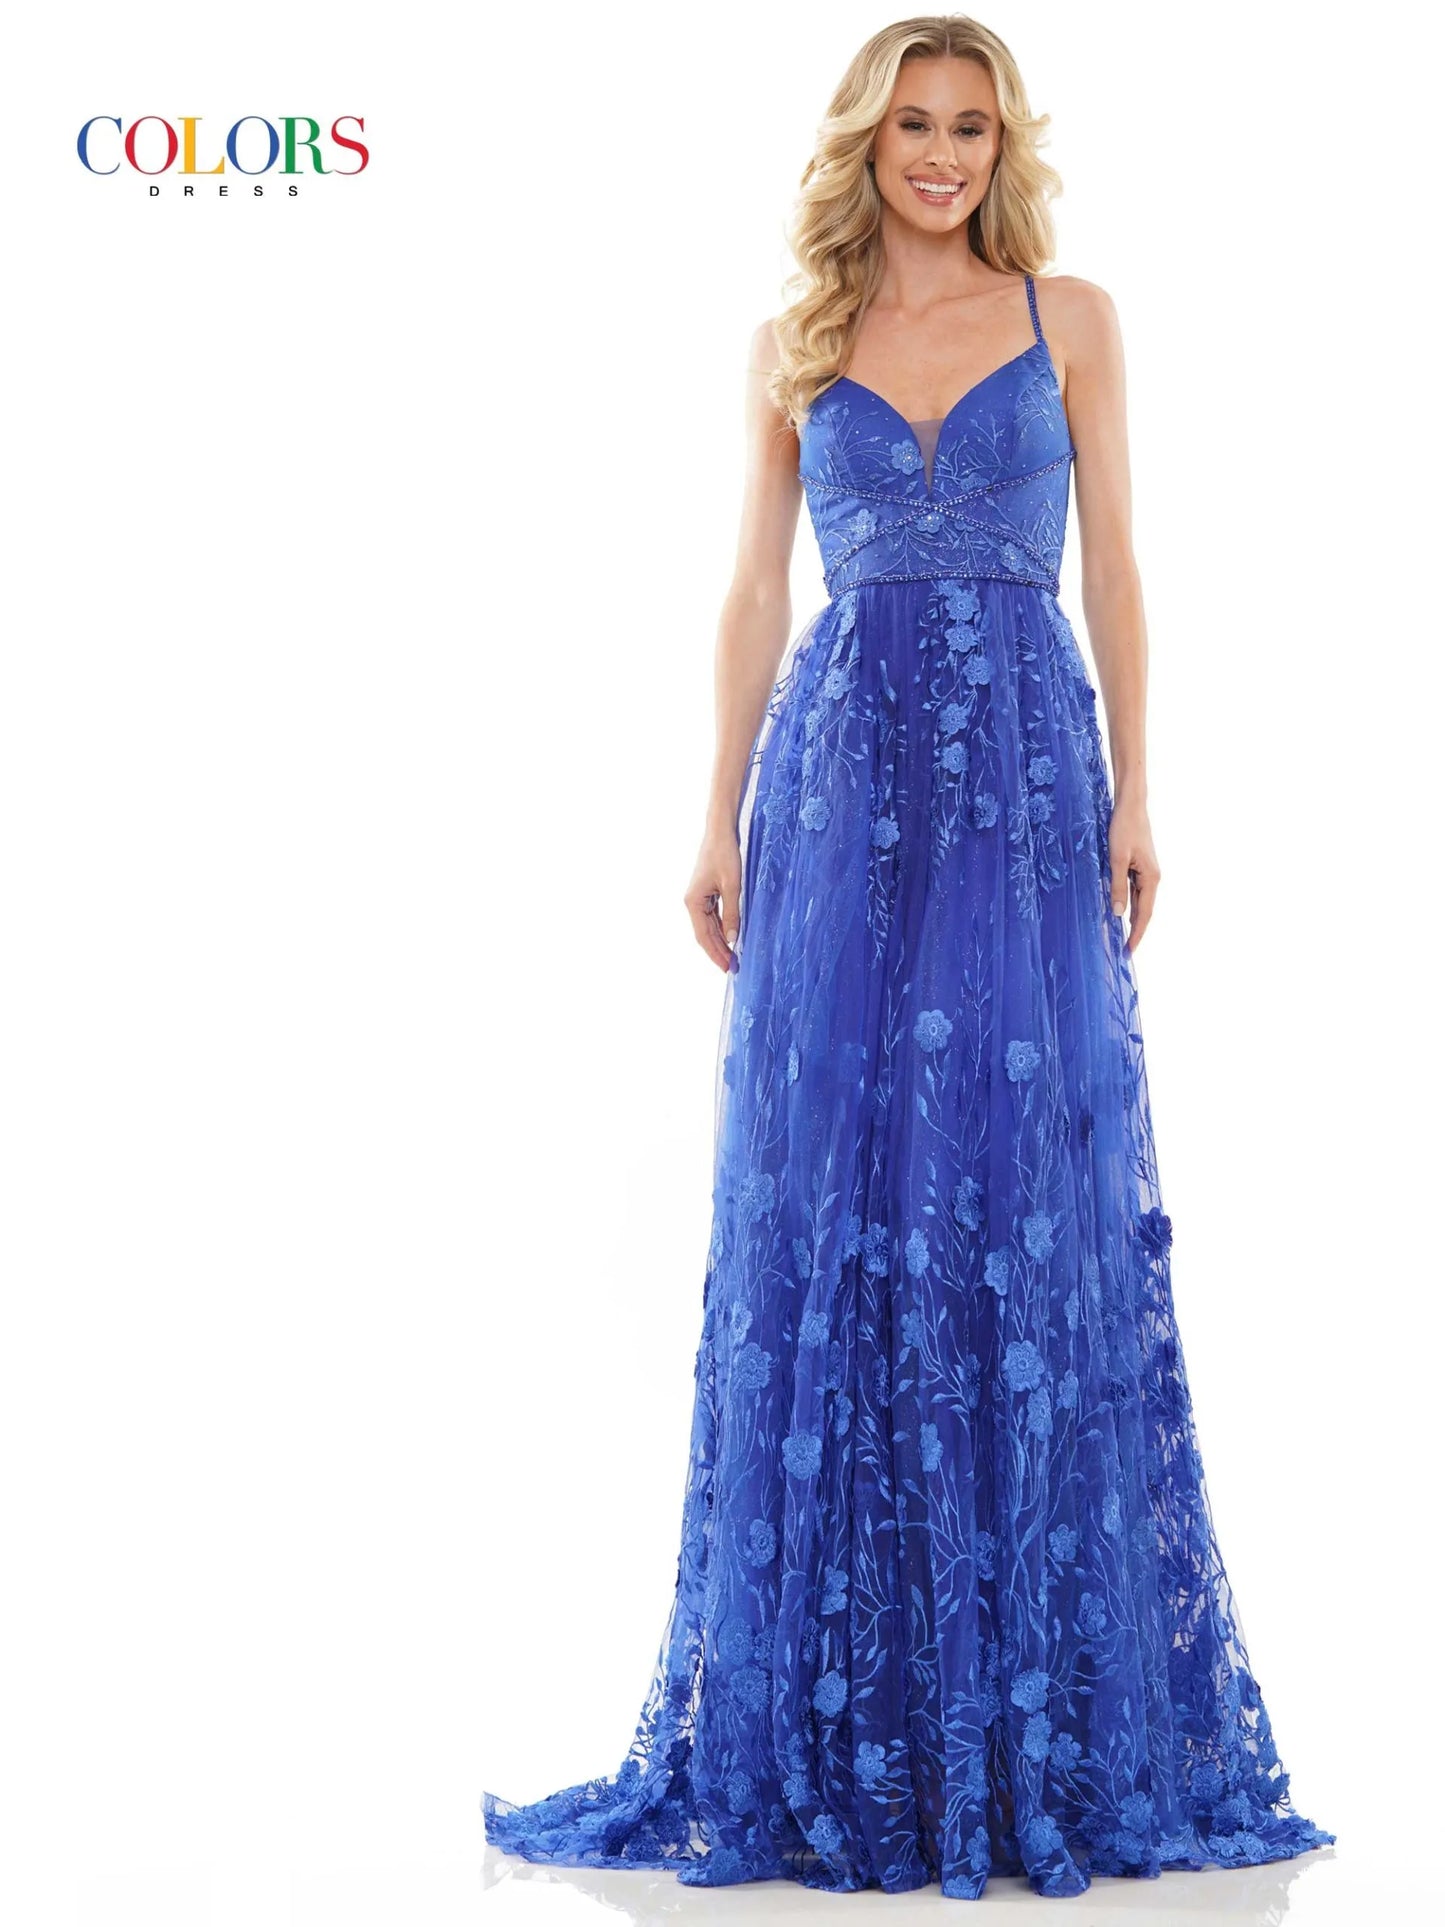 Elevate your prom night style with our Colors Dress 2726. This long prom dress features a corset top, embroidered mesh, and stunning 3D flower appliques. Made for formal events and pageants, this gown will make you stand out with its intricate design and expert craftsmanship.